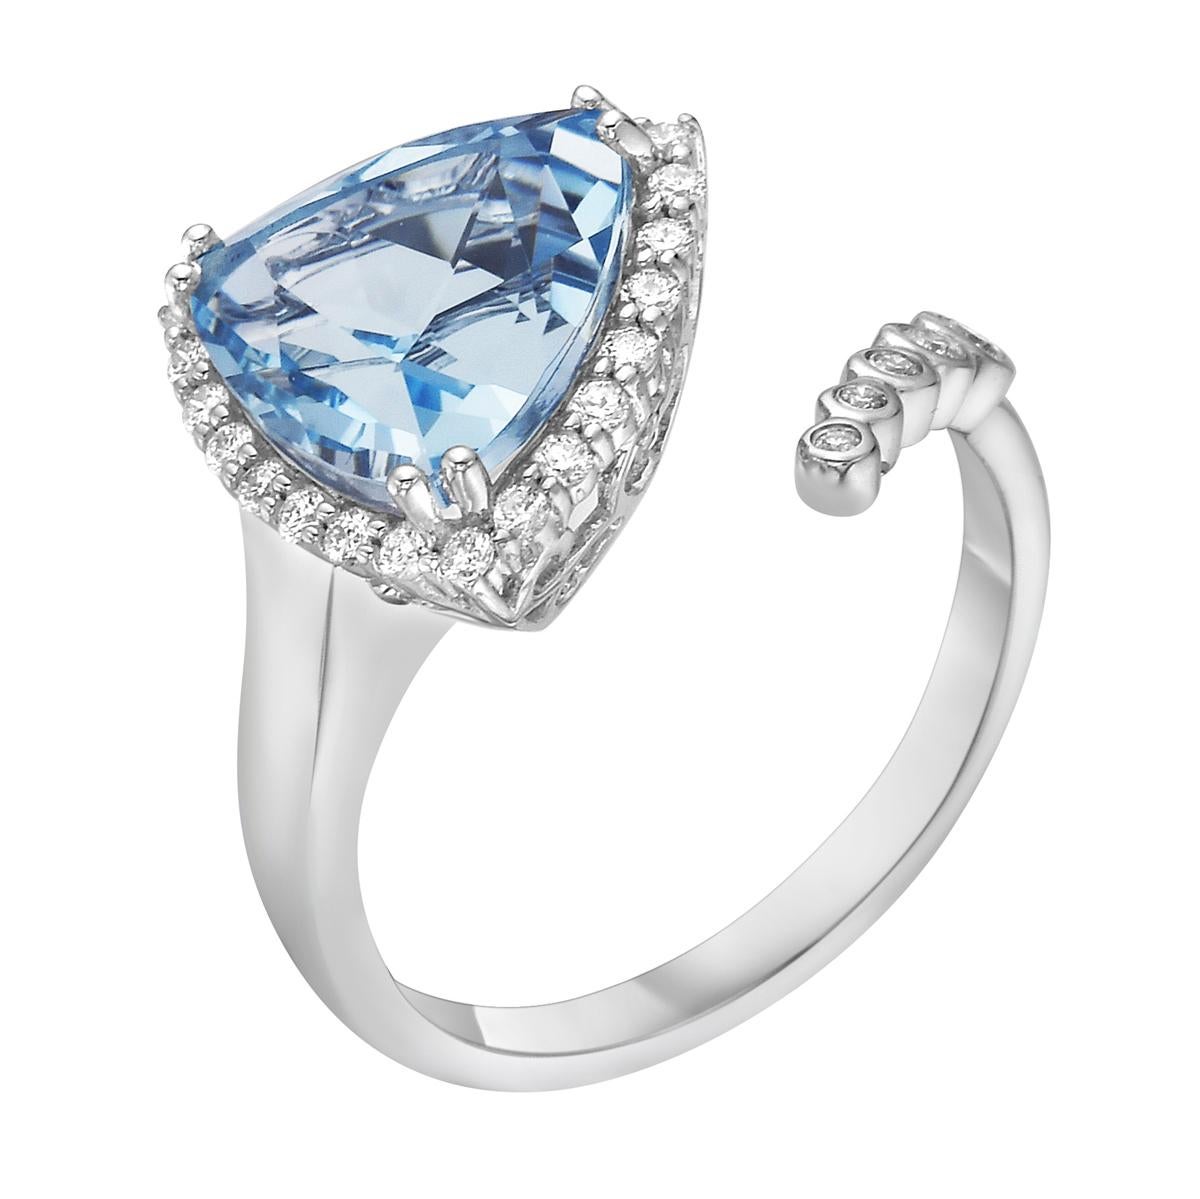 With this exquisite semi-precious sky blue topaz white gold bypass diamond ring, style and glamour are in the spotlight. This 14-karat trillion cut ring is made from 3.2 grams of gold, 1 sky blue topaz totaling 4.36 karats, as well as 29 round